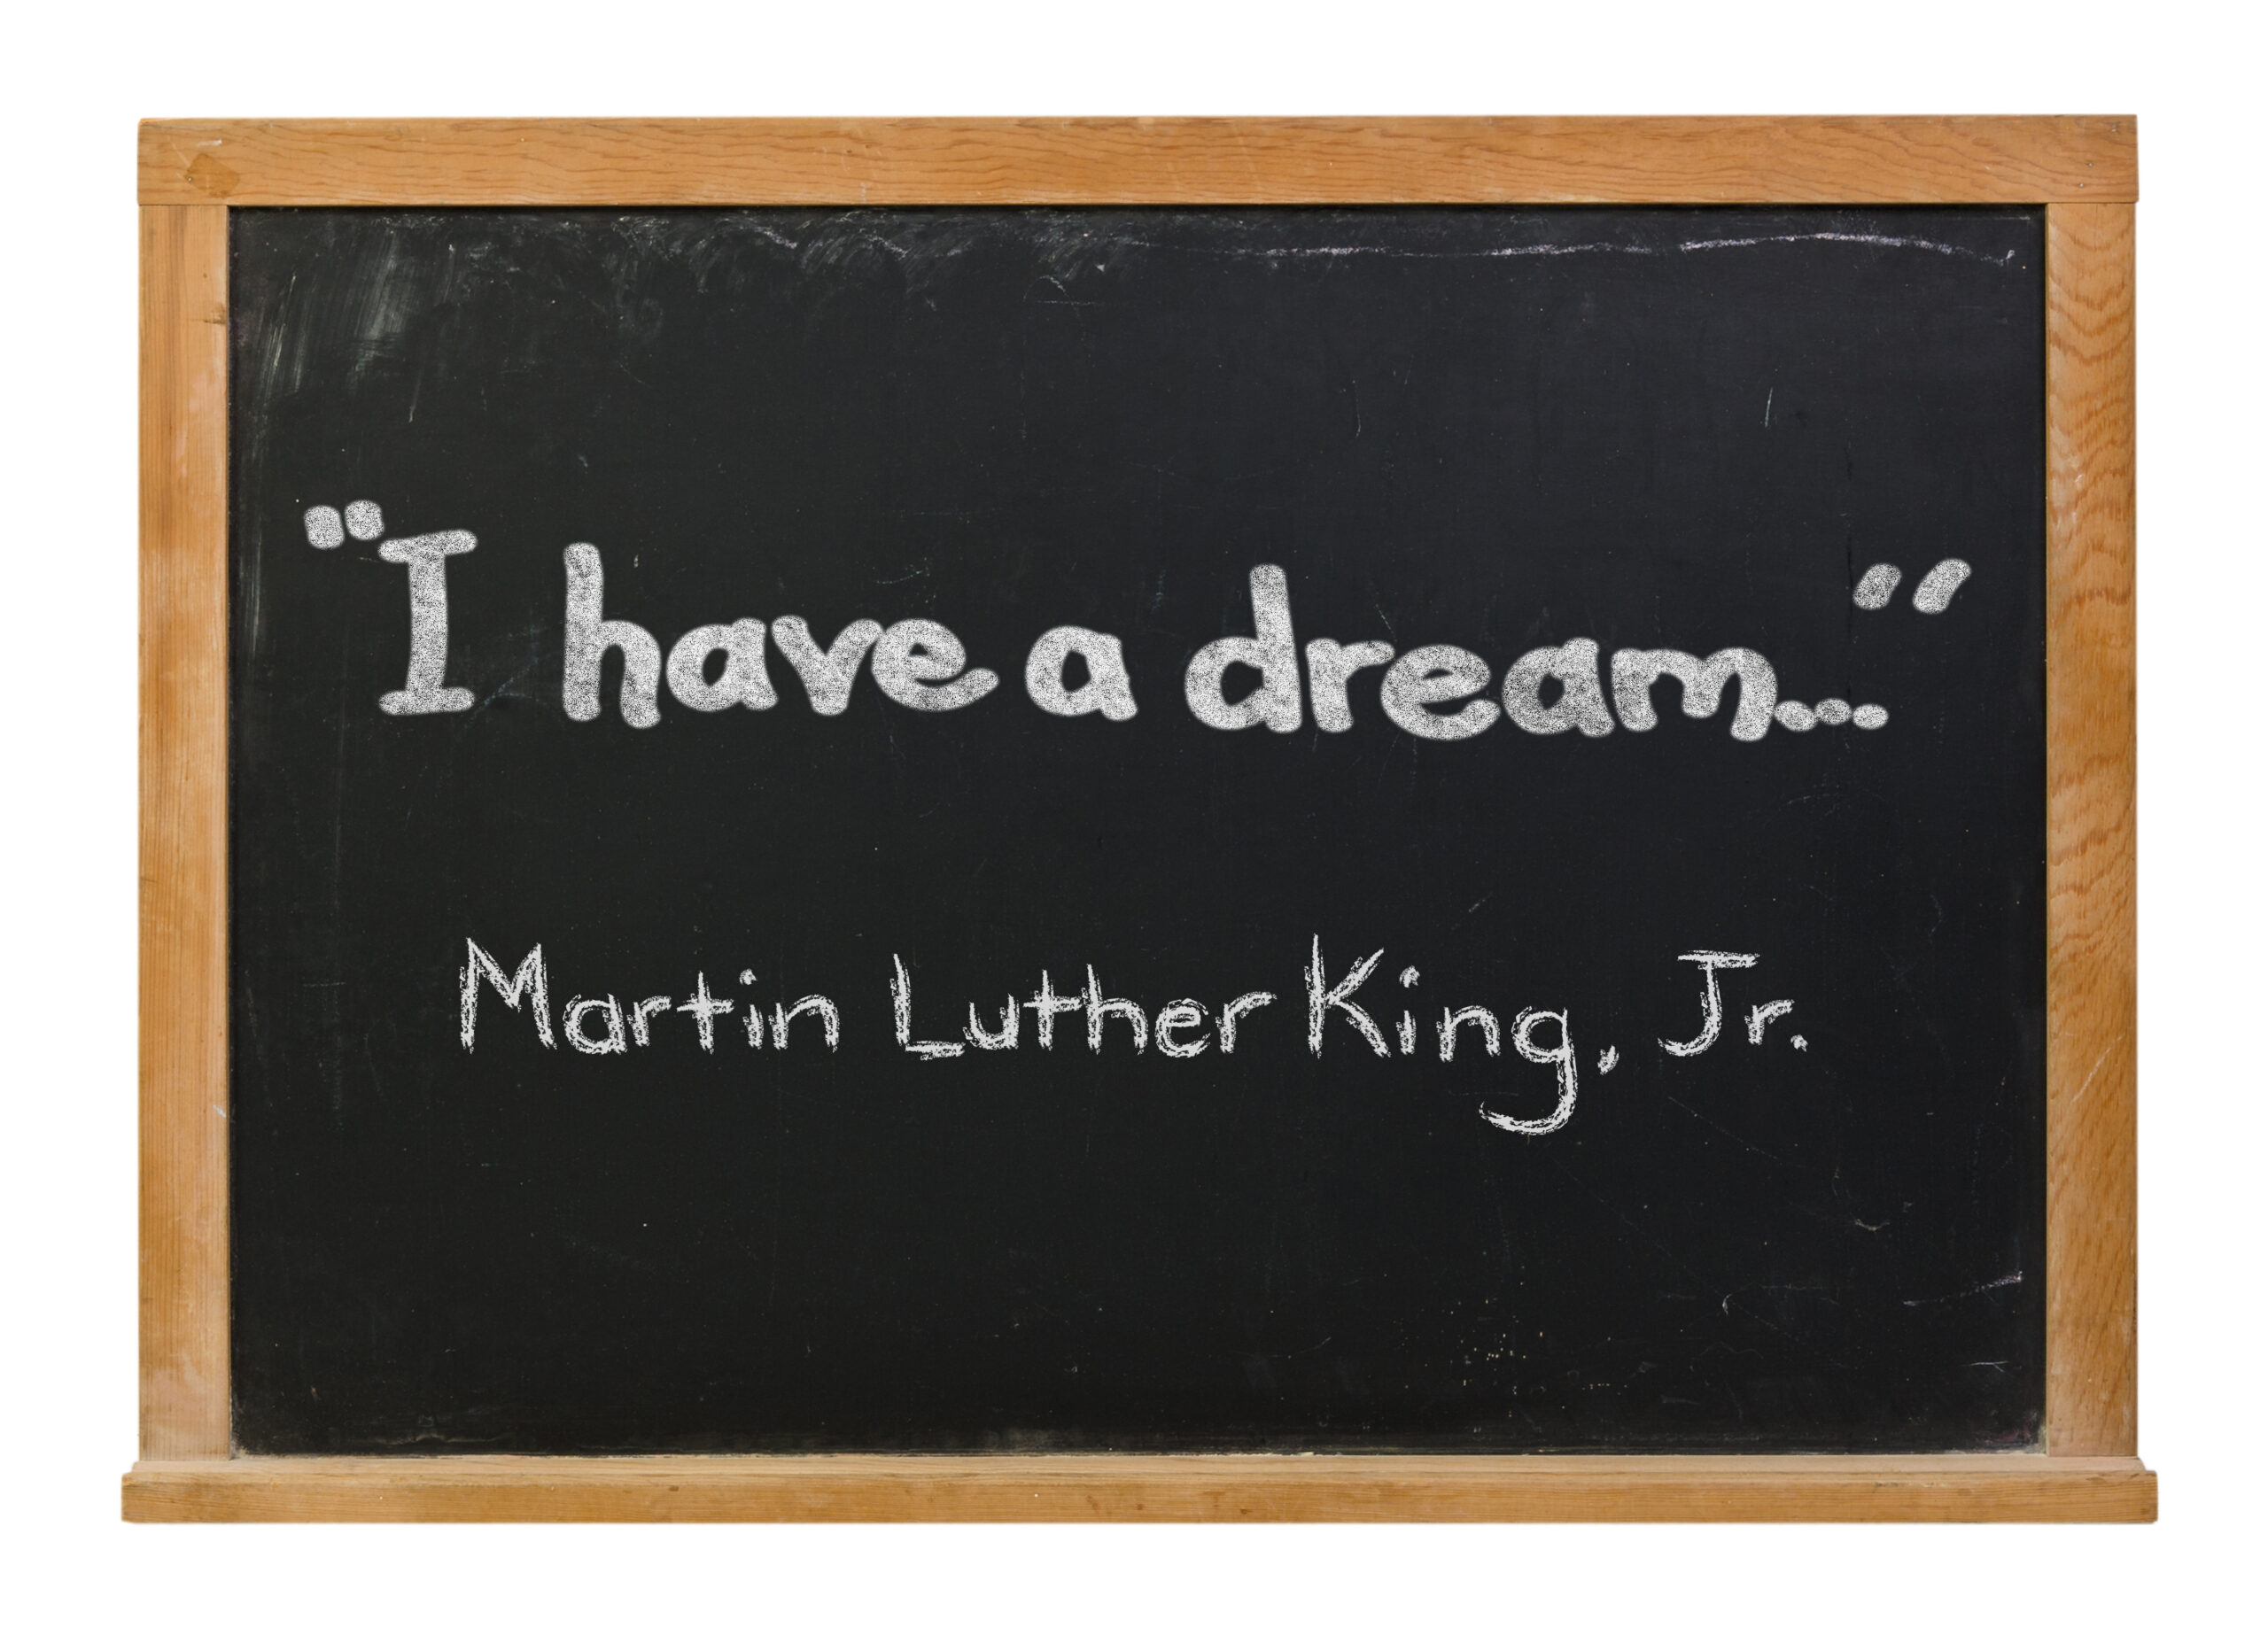 i,have,a,dream,and,martin,luther,king,,jr.,written